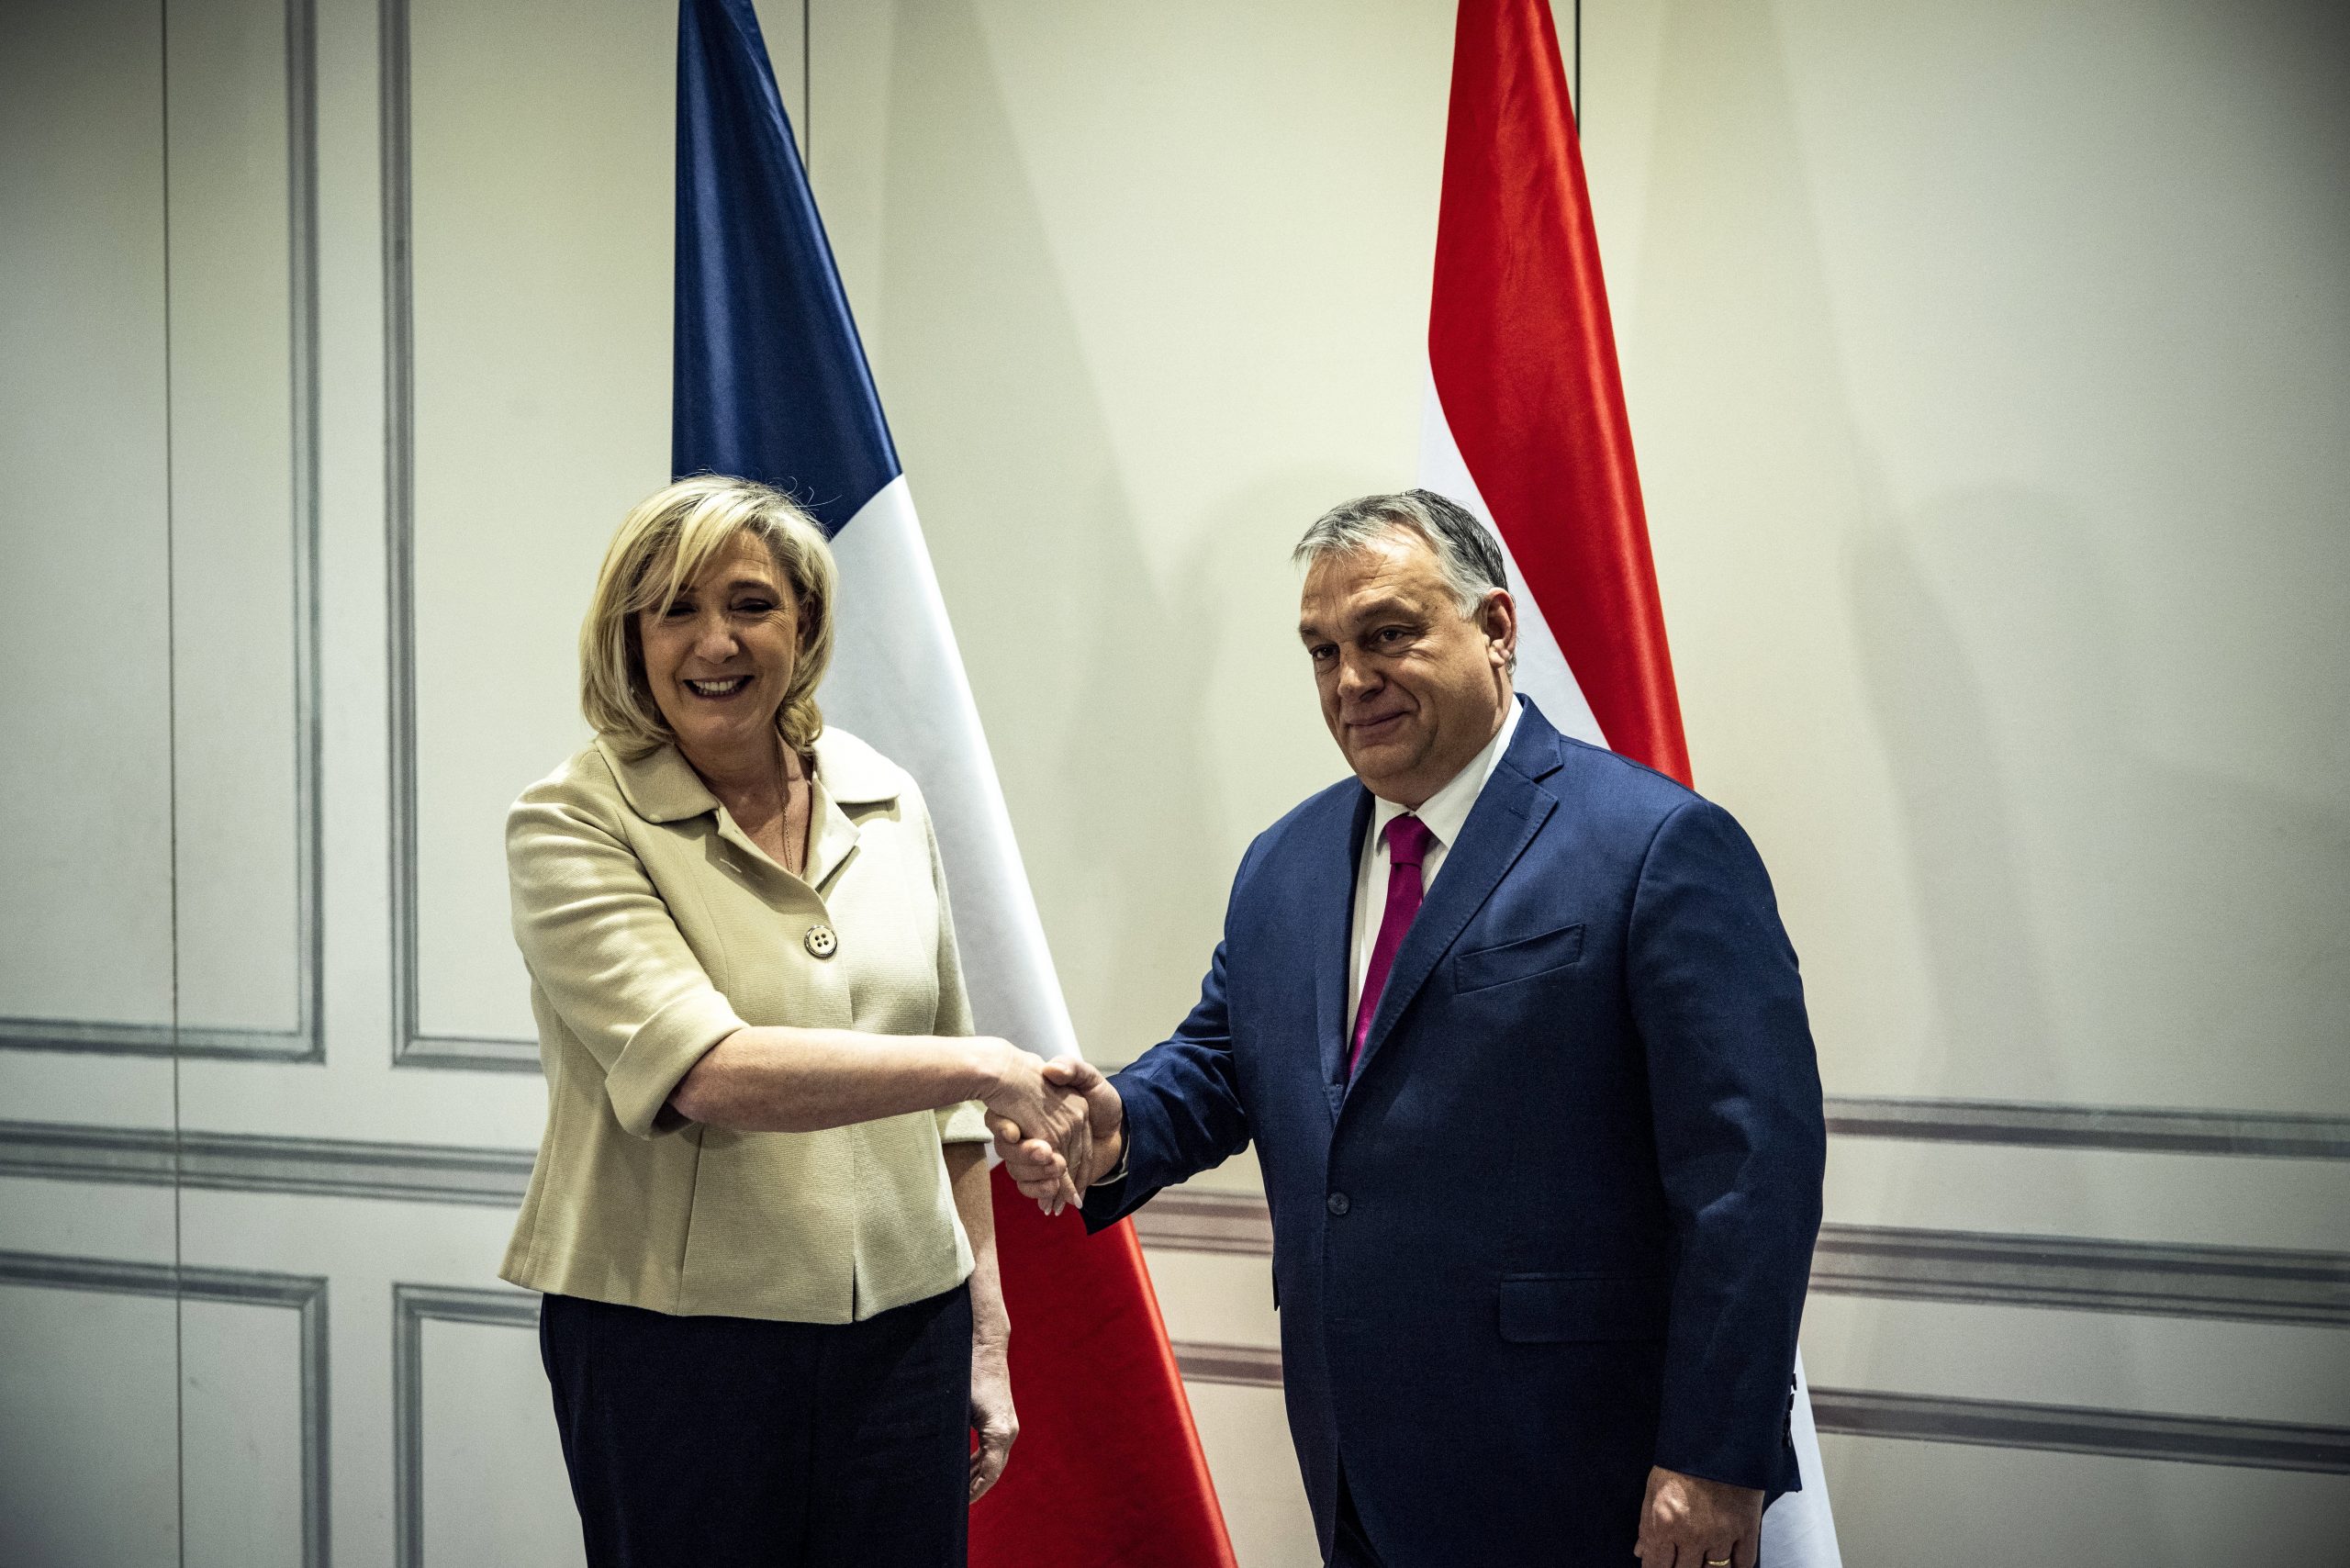 Press: Marine Le Pen's Campaign Financed by Loan from Hungarian Bank